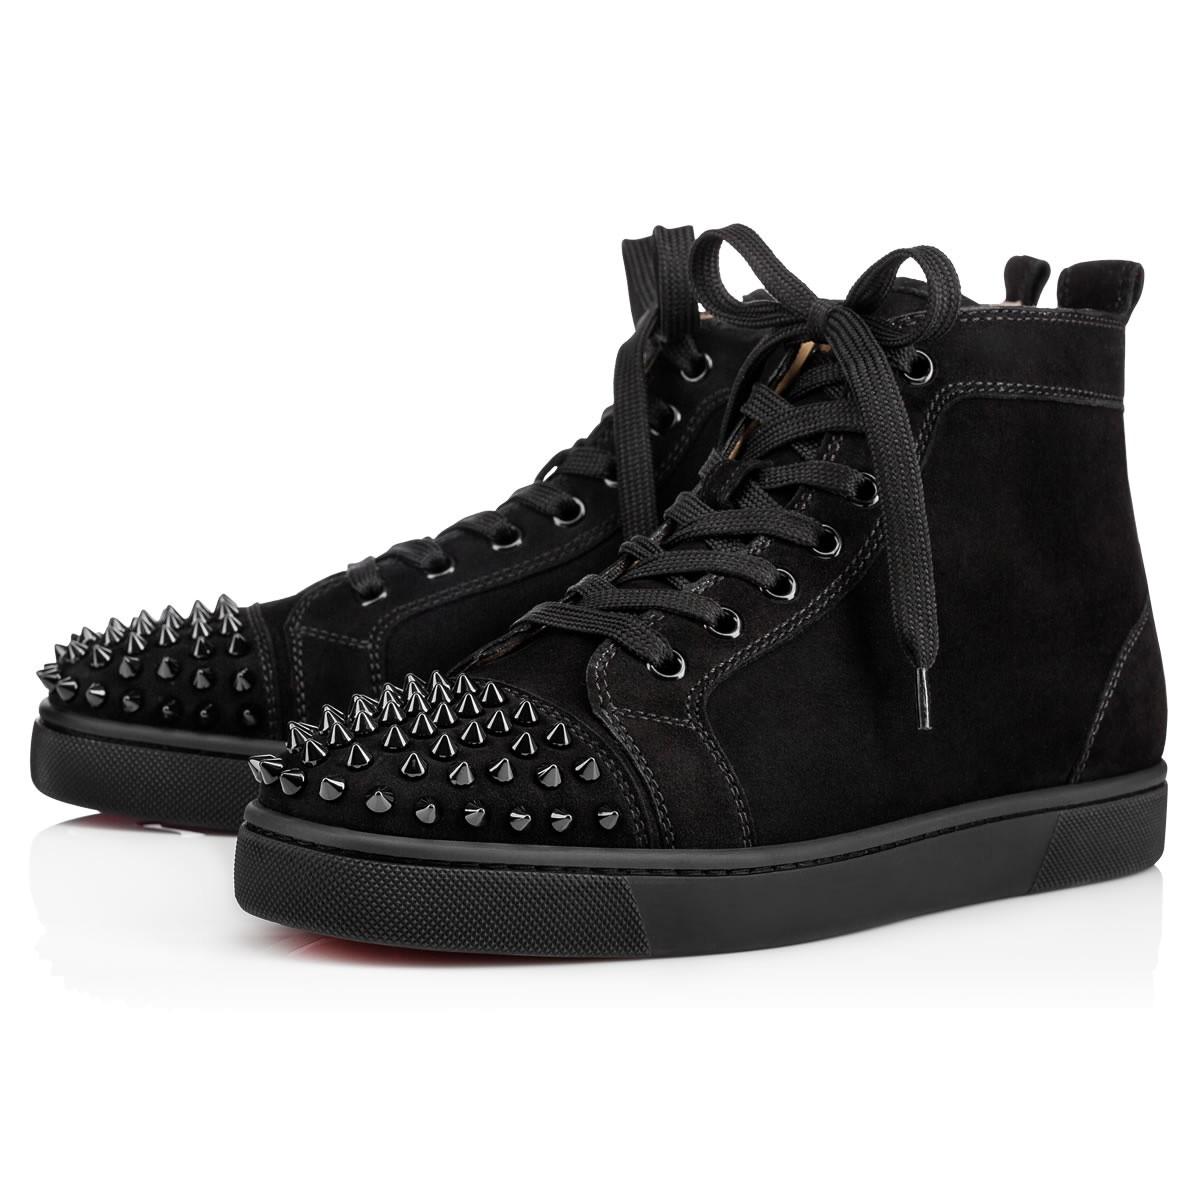 Christian Louboutin Suede Lou Spikes in Black for Men - Lyst